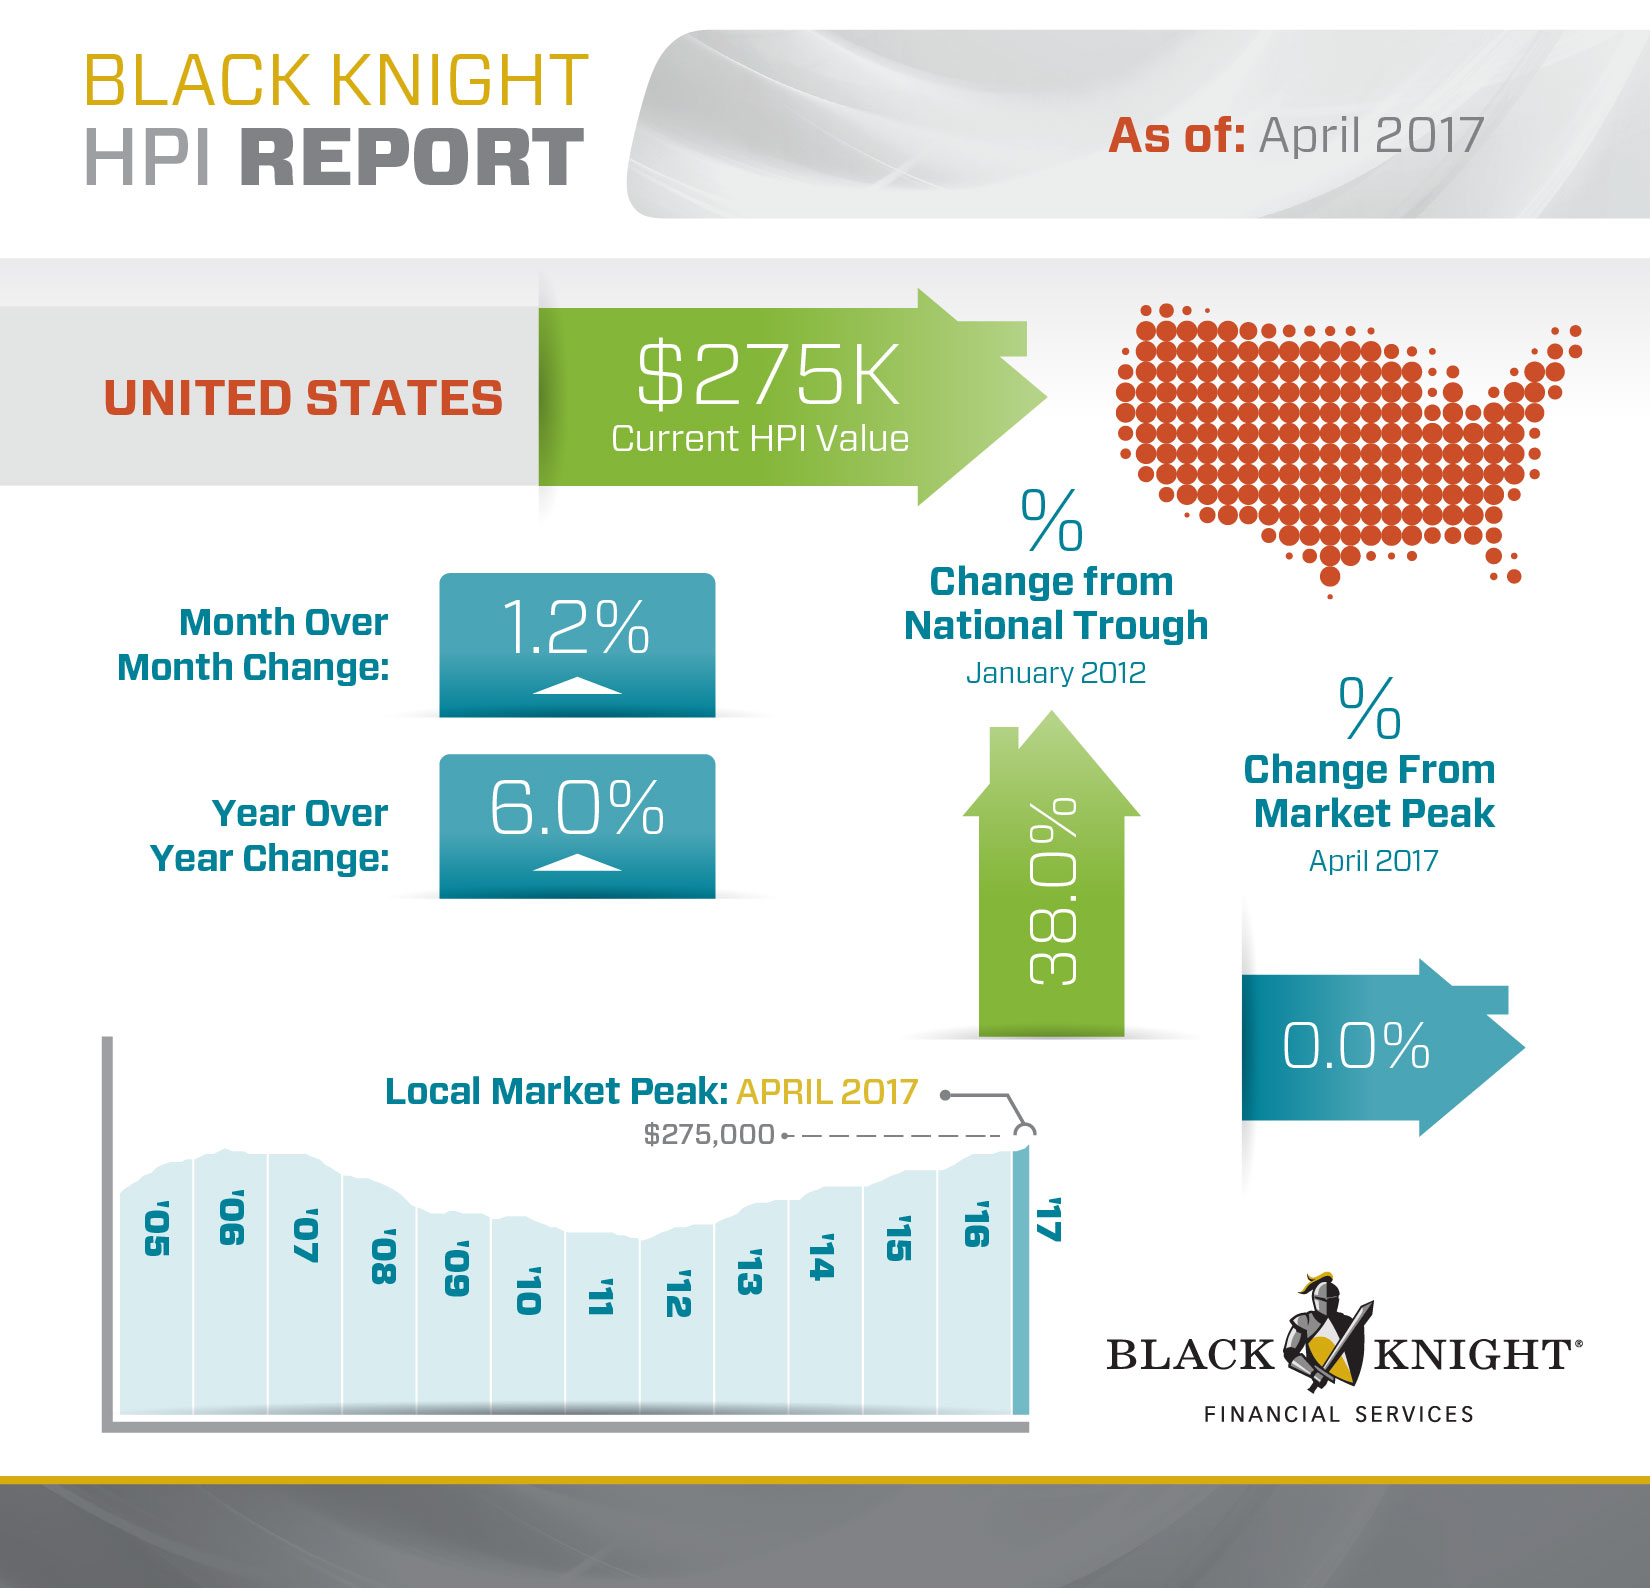 Black Knight Financial Services (BKFS) has announced that its proprietary home price index (HPI) hit a new high in April at $275,000